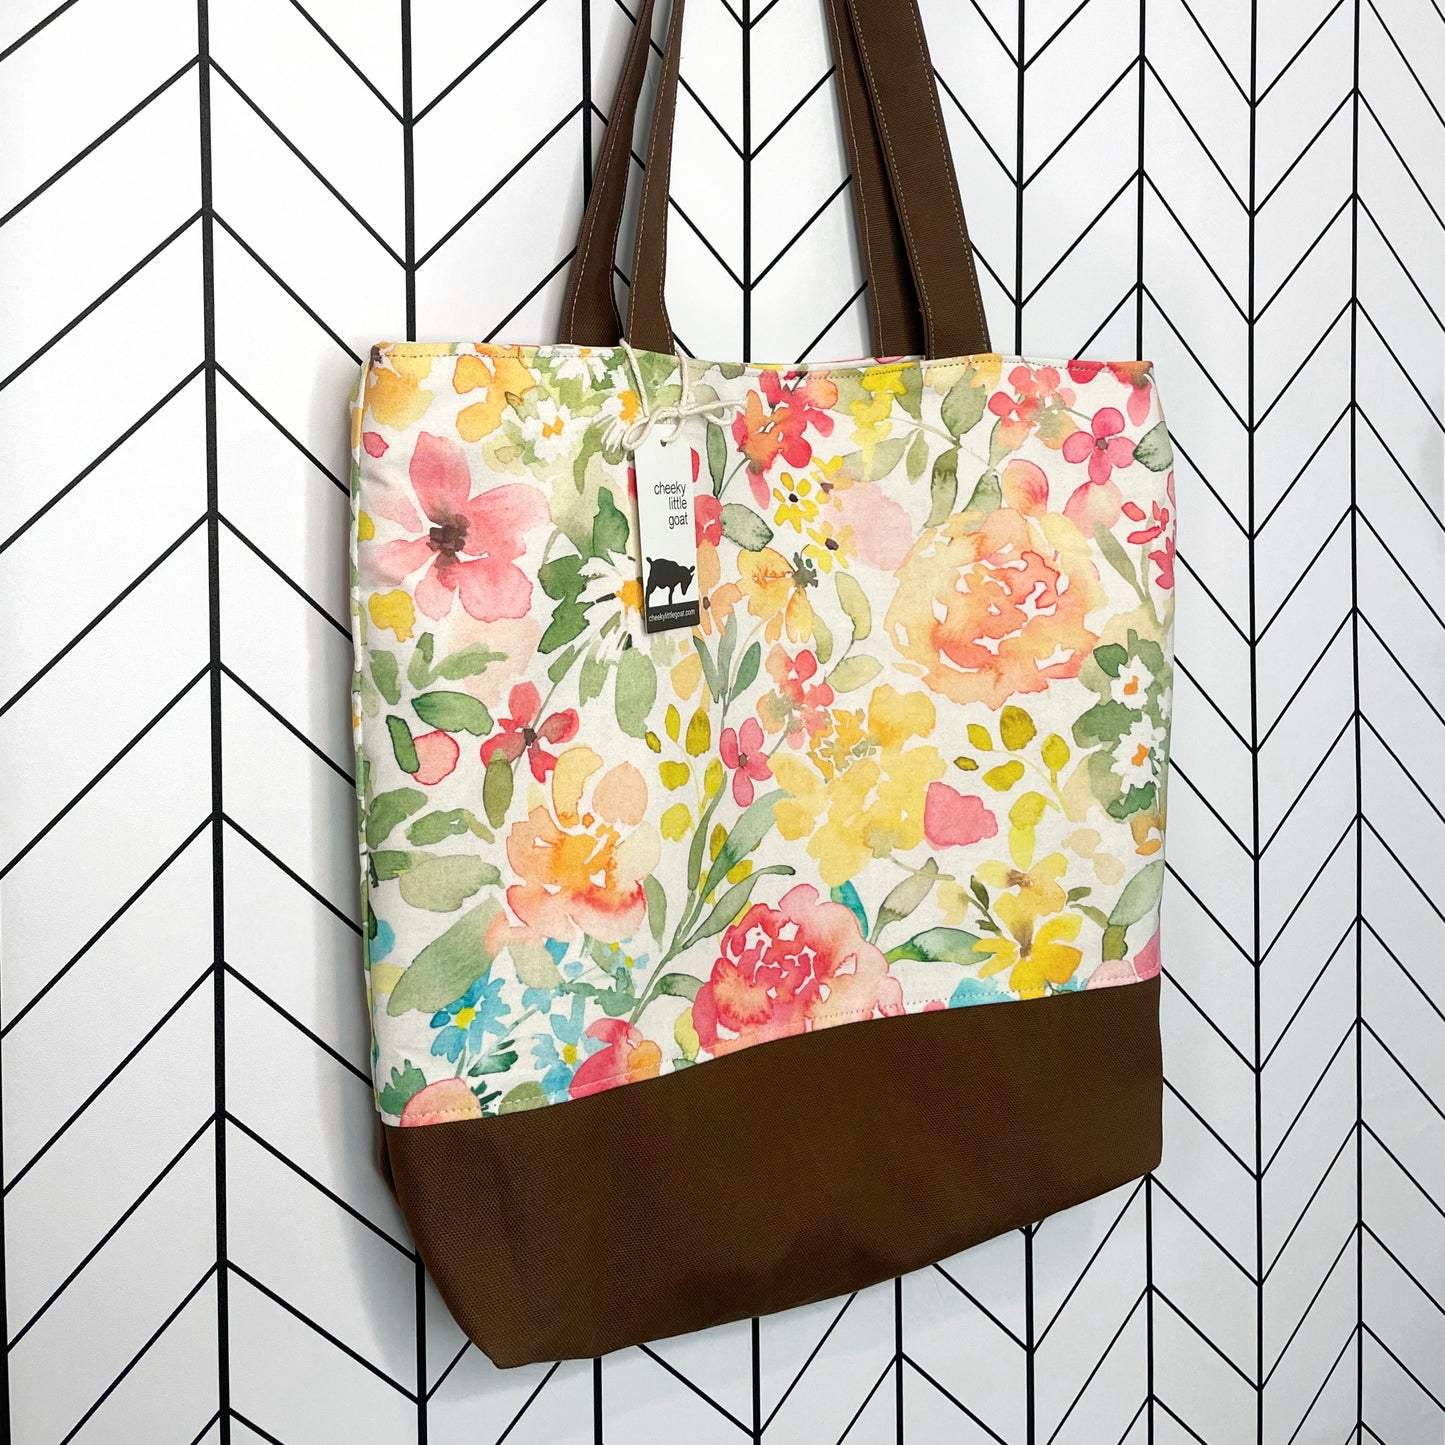 Cheeky Little Tote: Watercolor